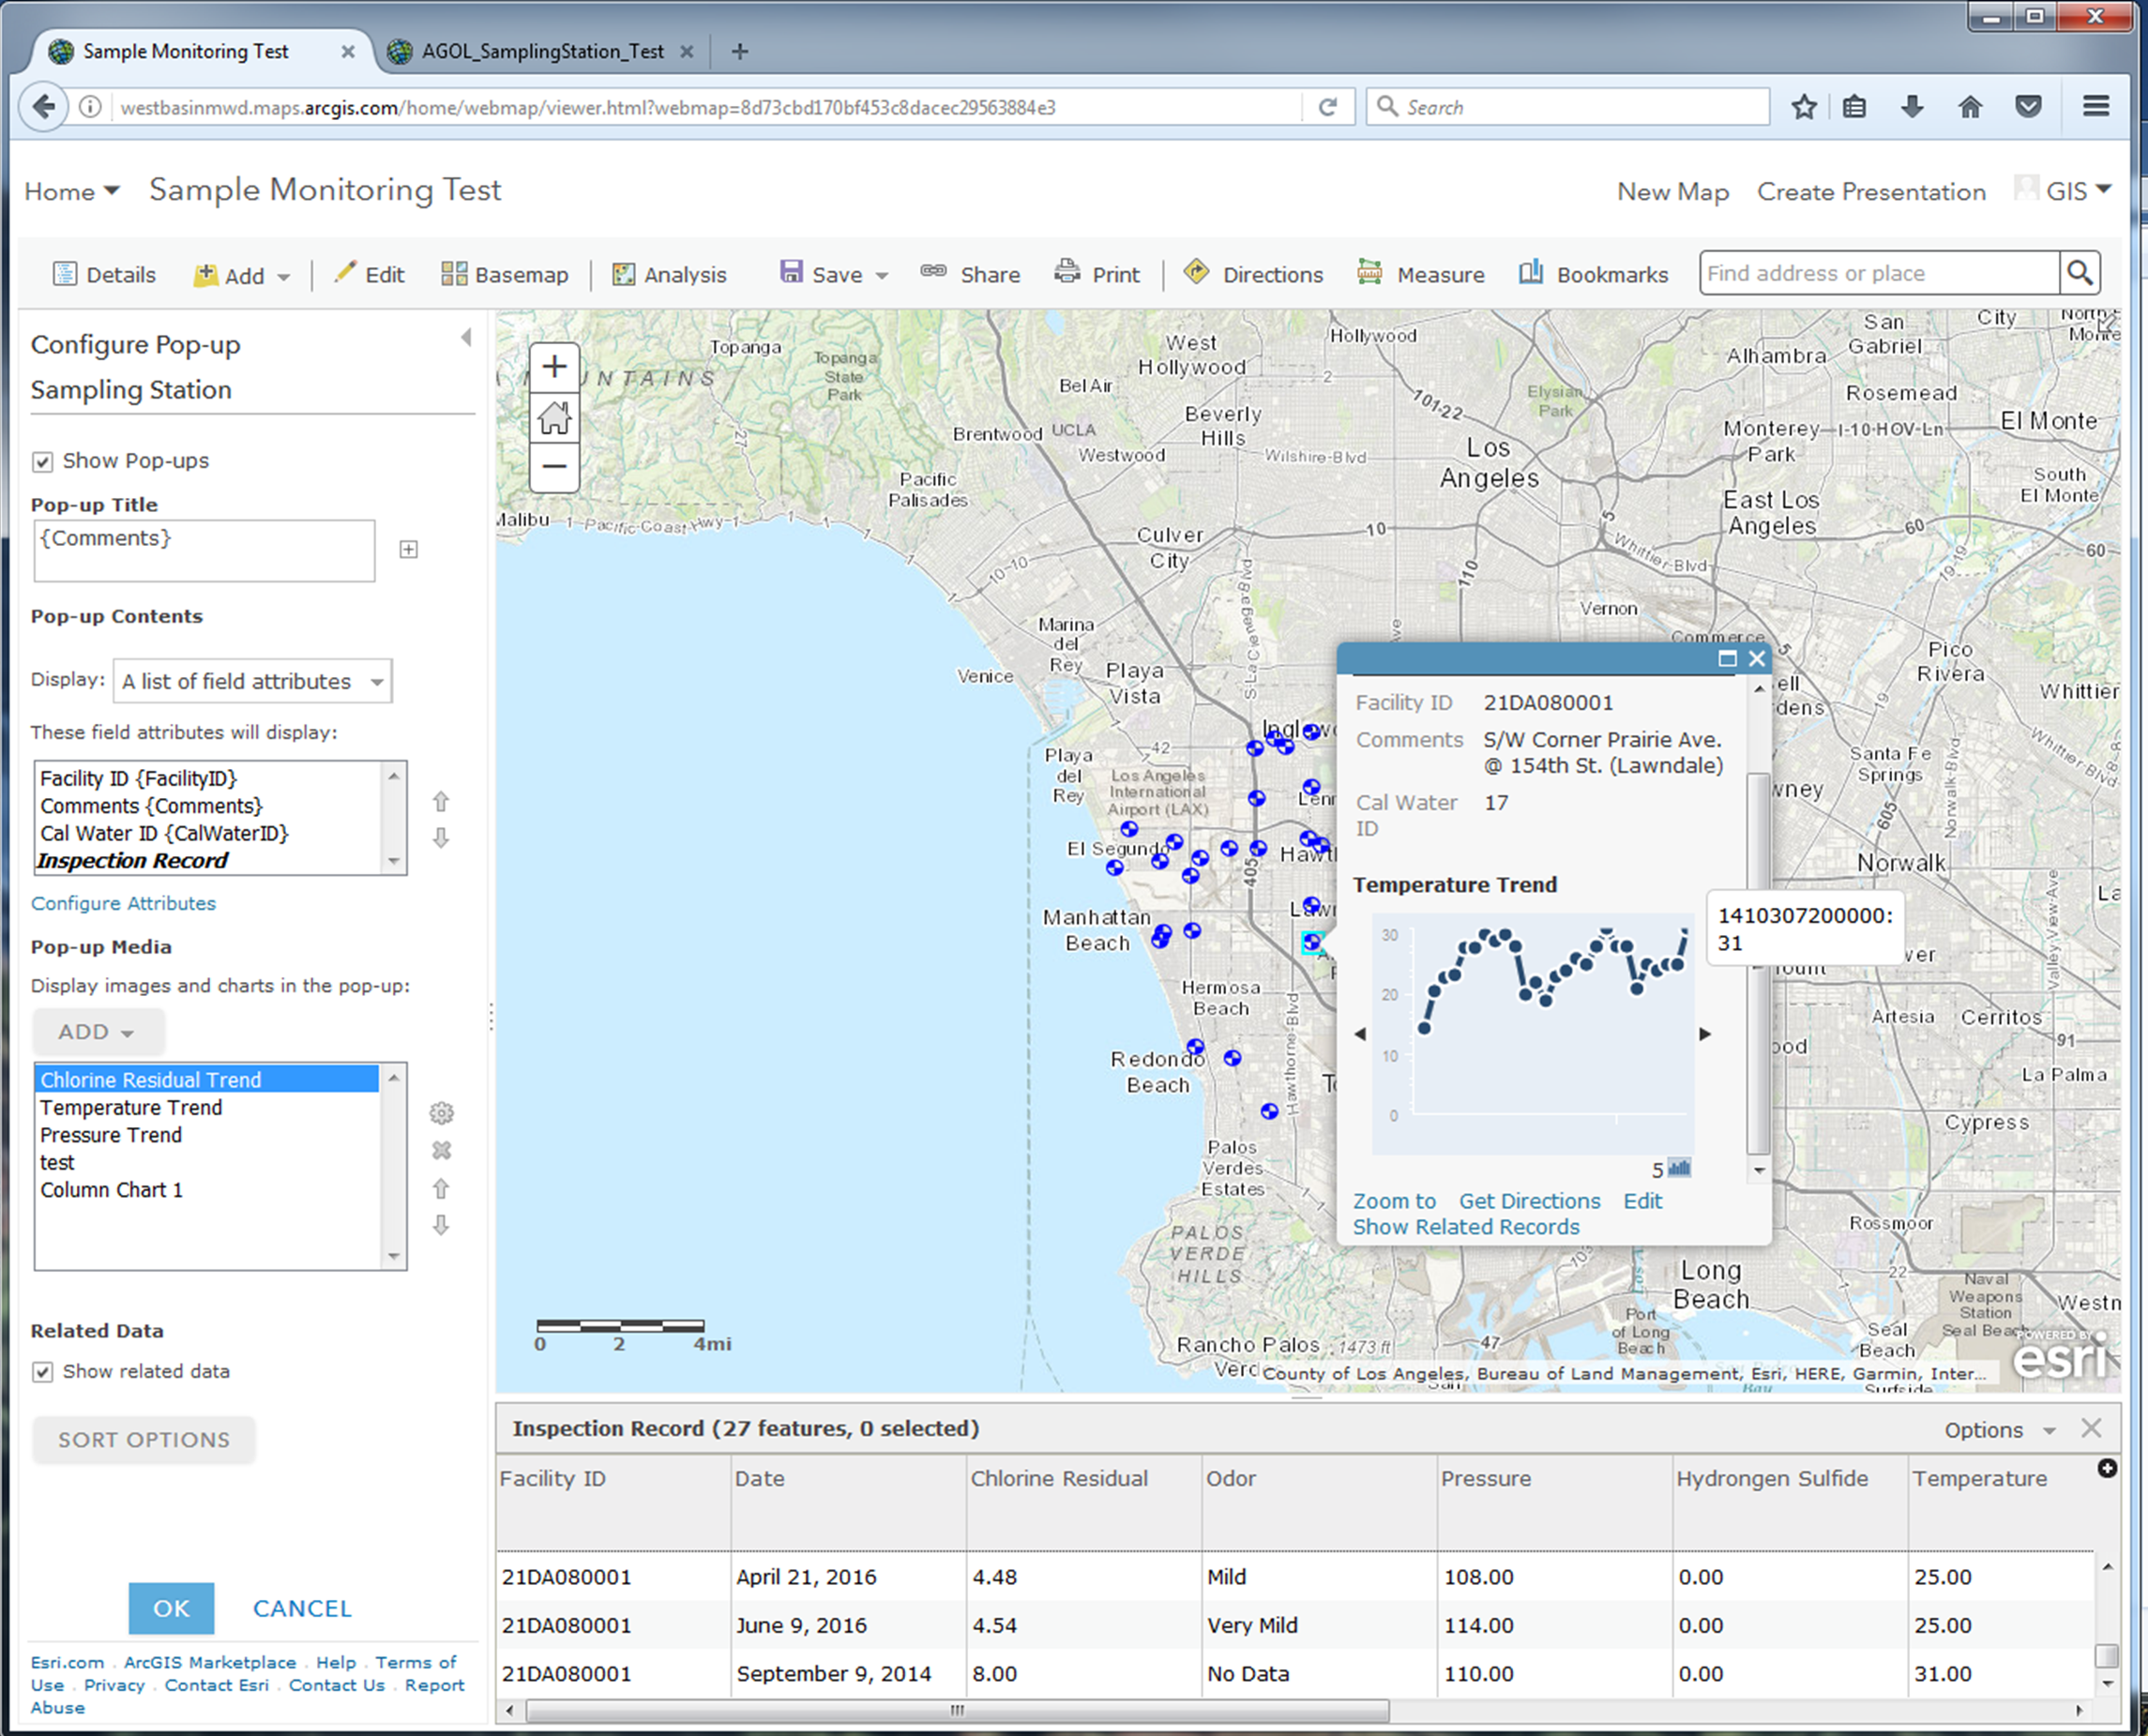 Related Table's Pop-Up and Chart graph on Date att... - Esri Community